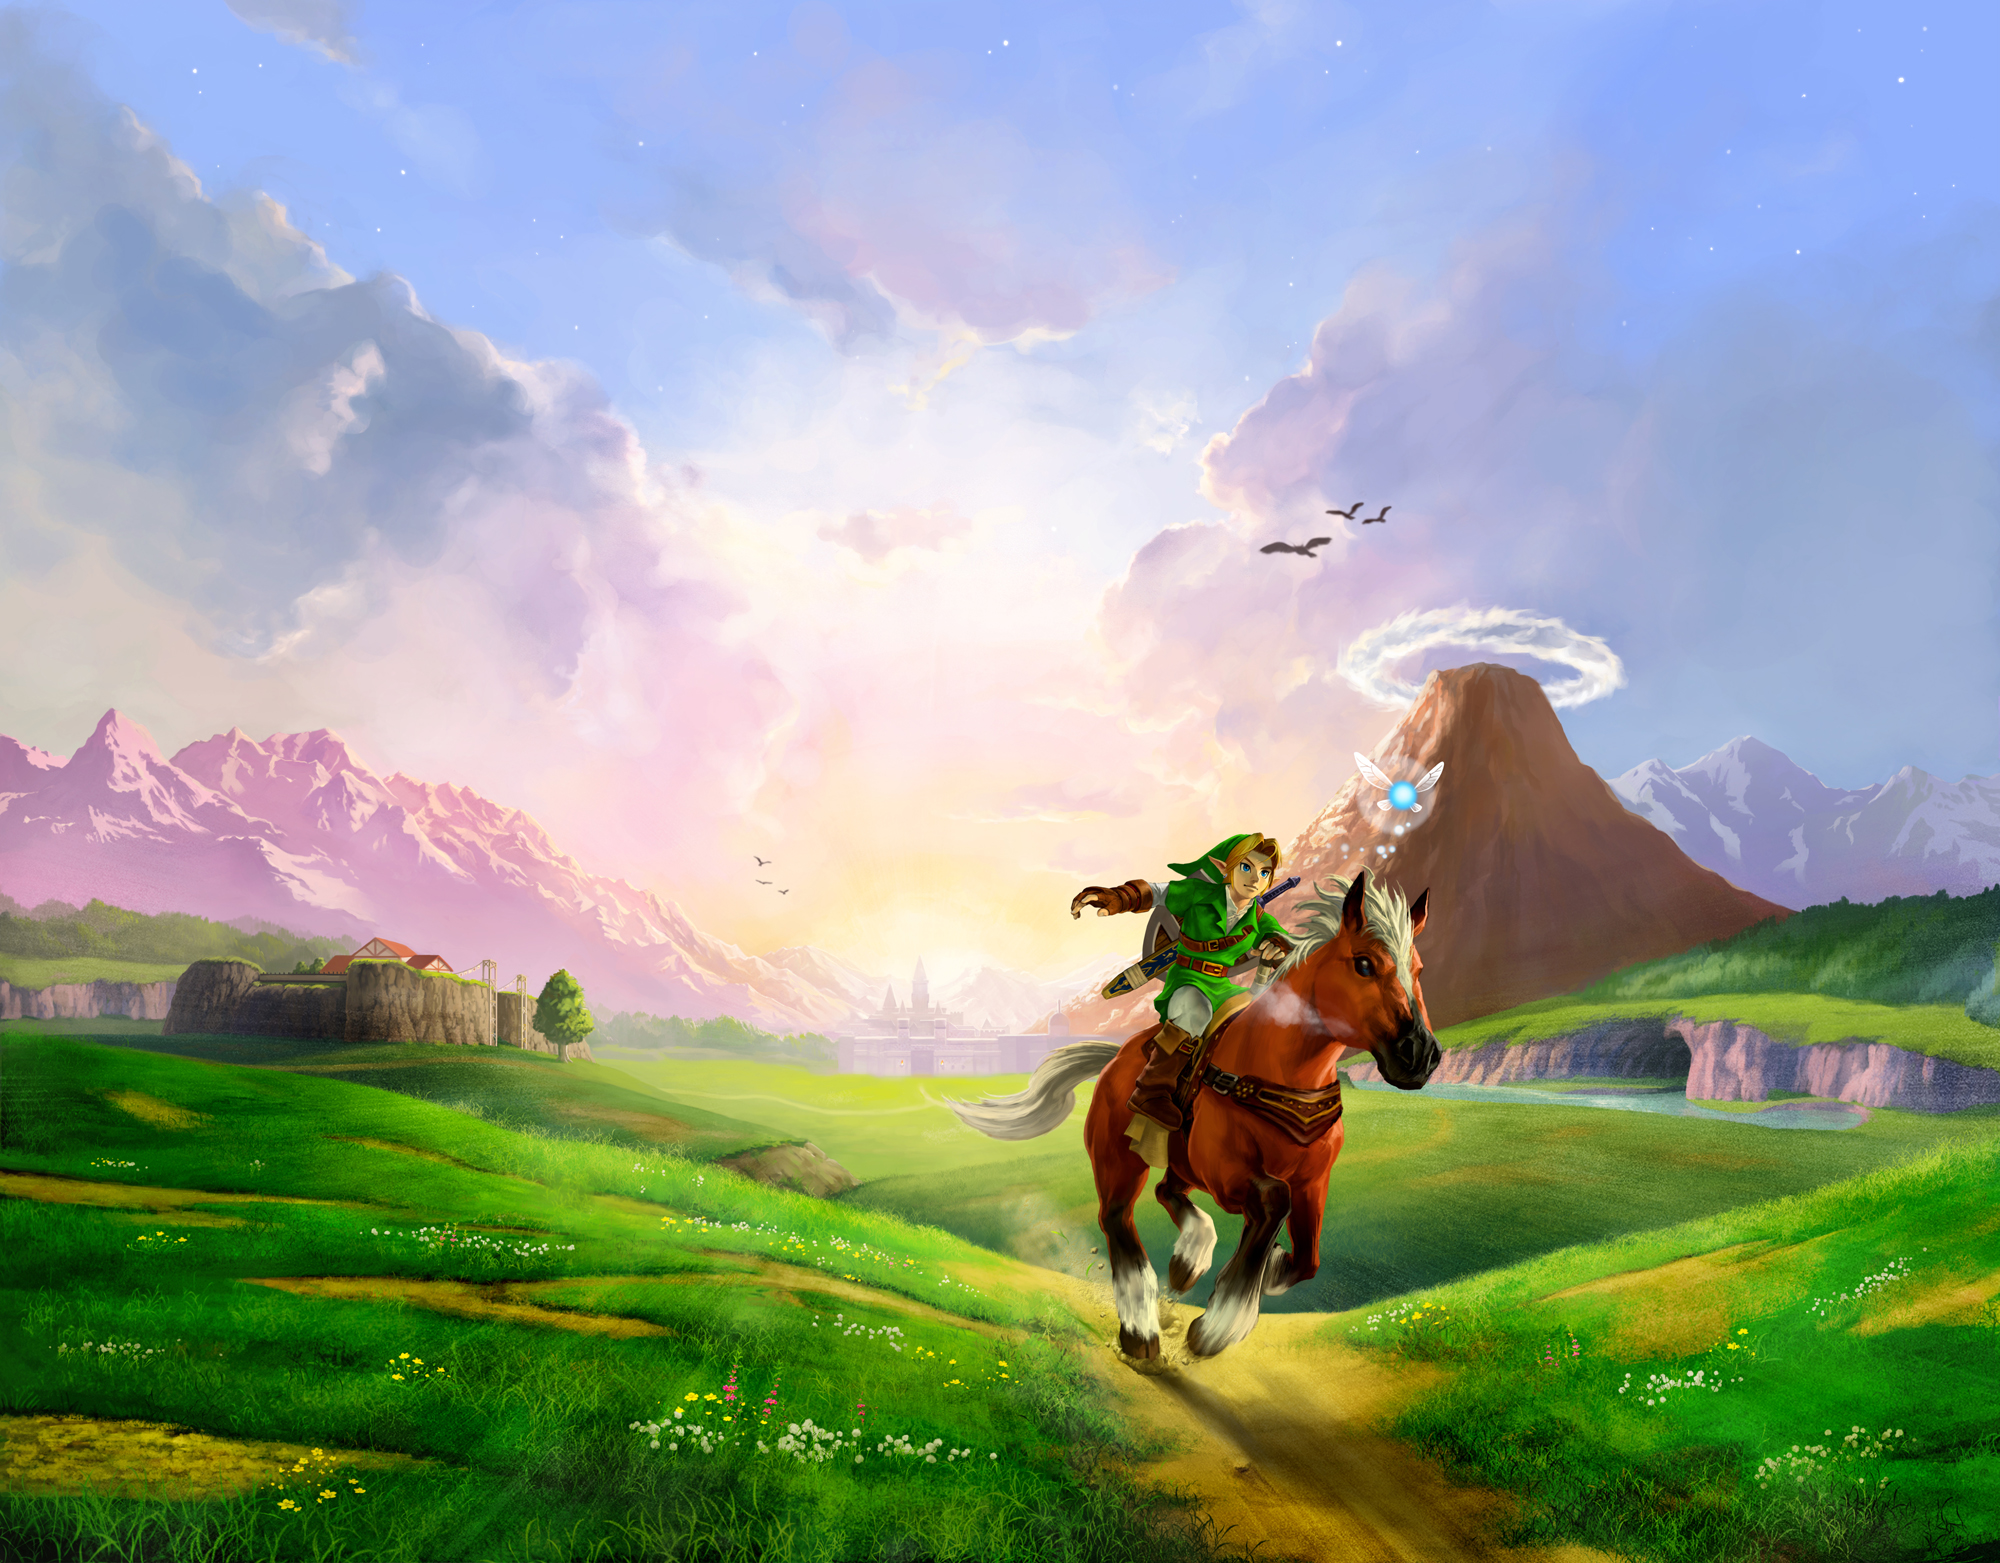 Zelda: Ocarina of Time artwork showing Link riding his horse across Hyrule Field, a sunrise, Hyrule Town, Lon Lon Ranch and Death Mountain behind him